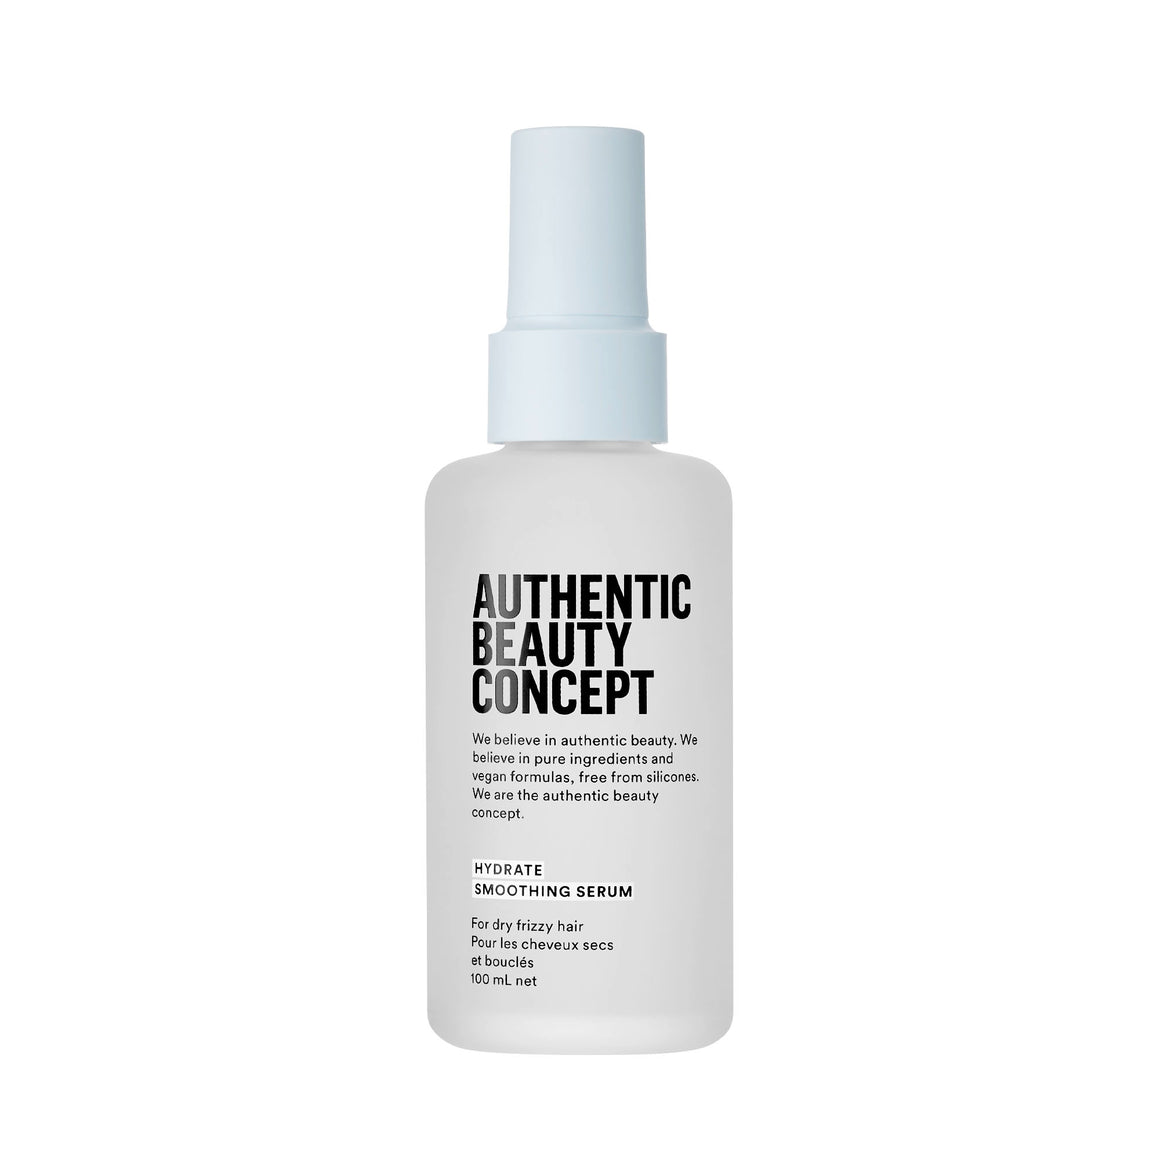 Authentic Beauty Concept Hydrate Smoothing Serum 100ml at Eds Hair Bramhall